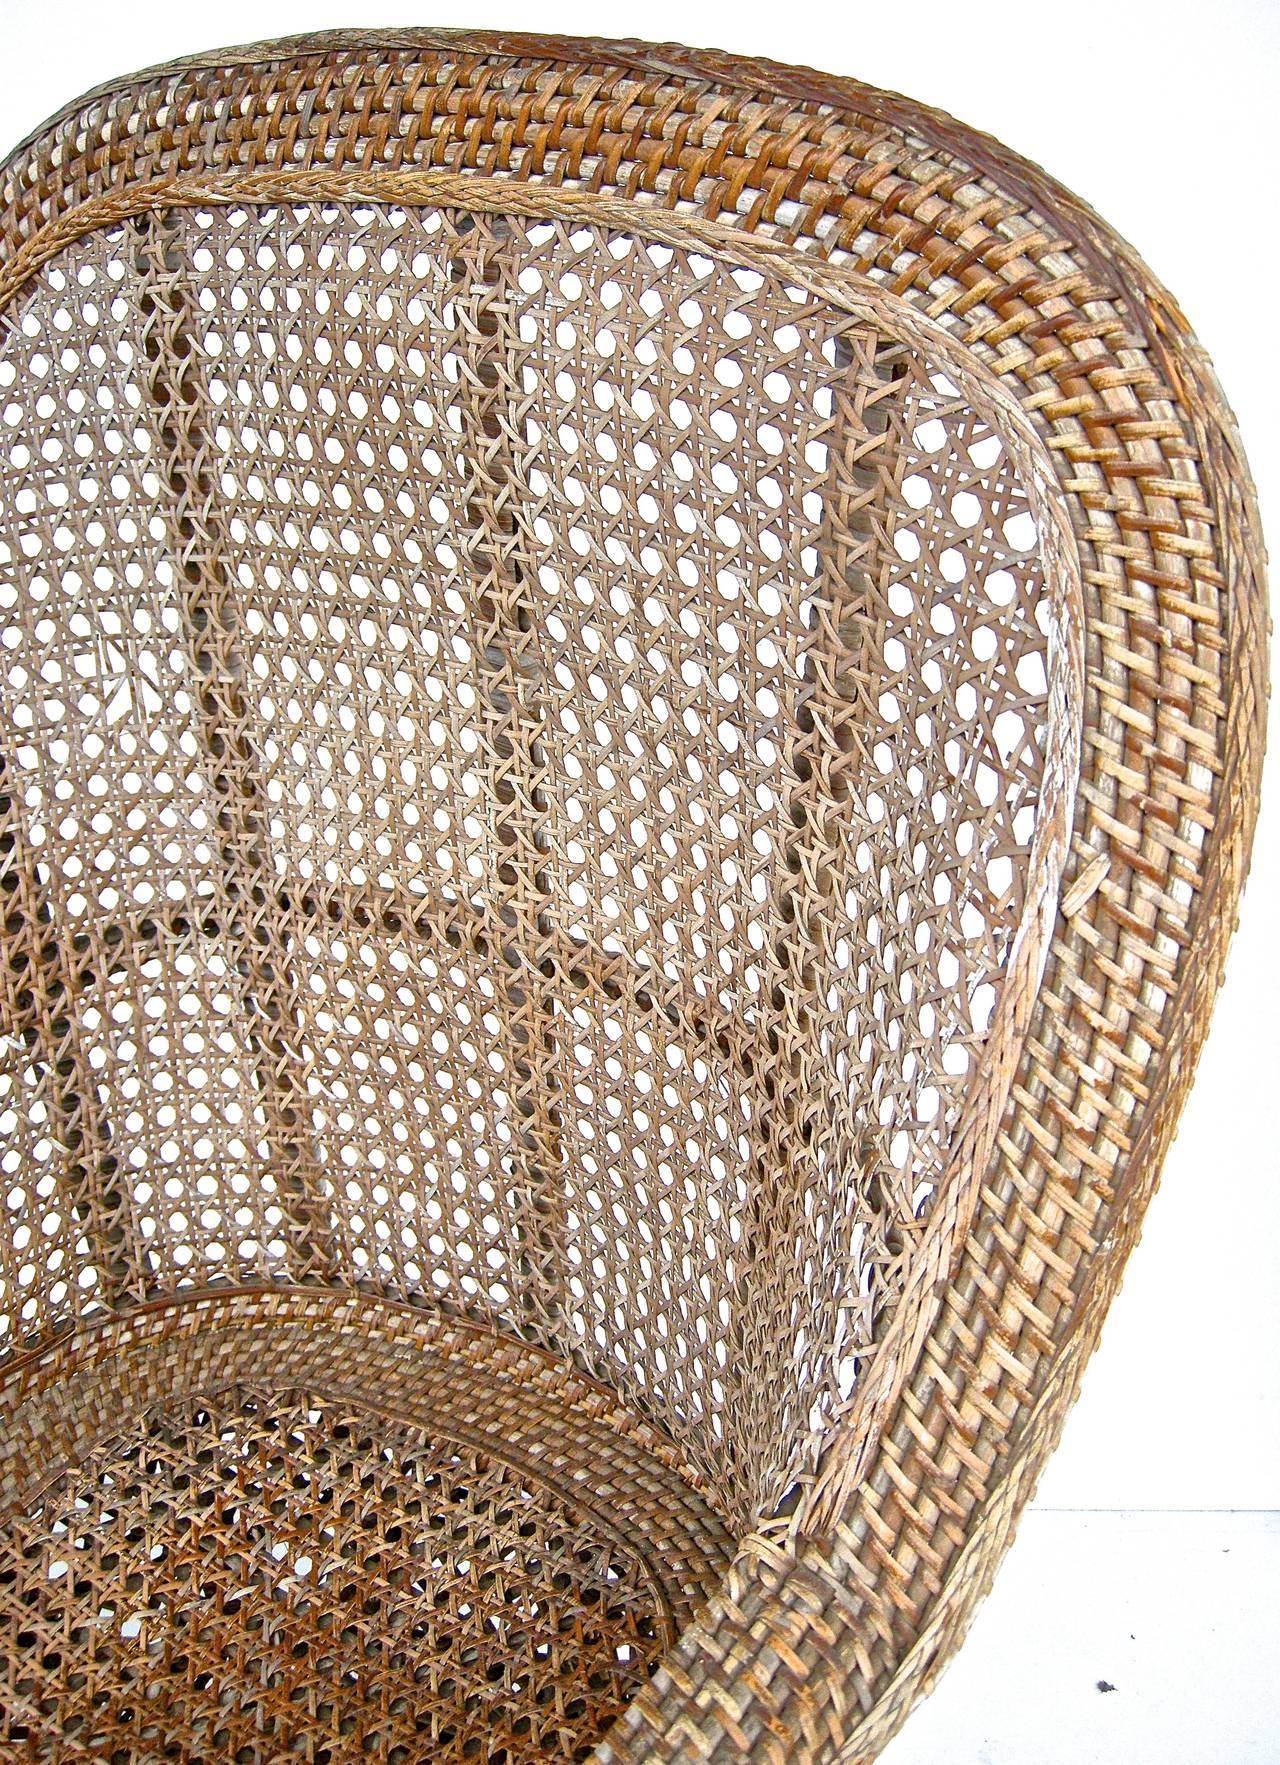 Moroccan Inspired Diminutive Wicker Armchairs For Sale 1